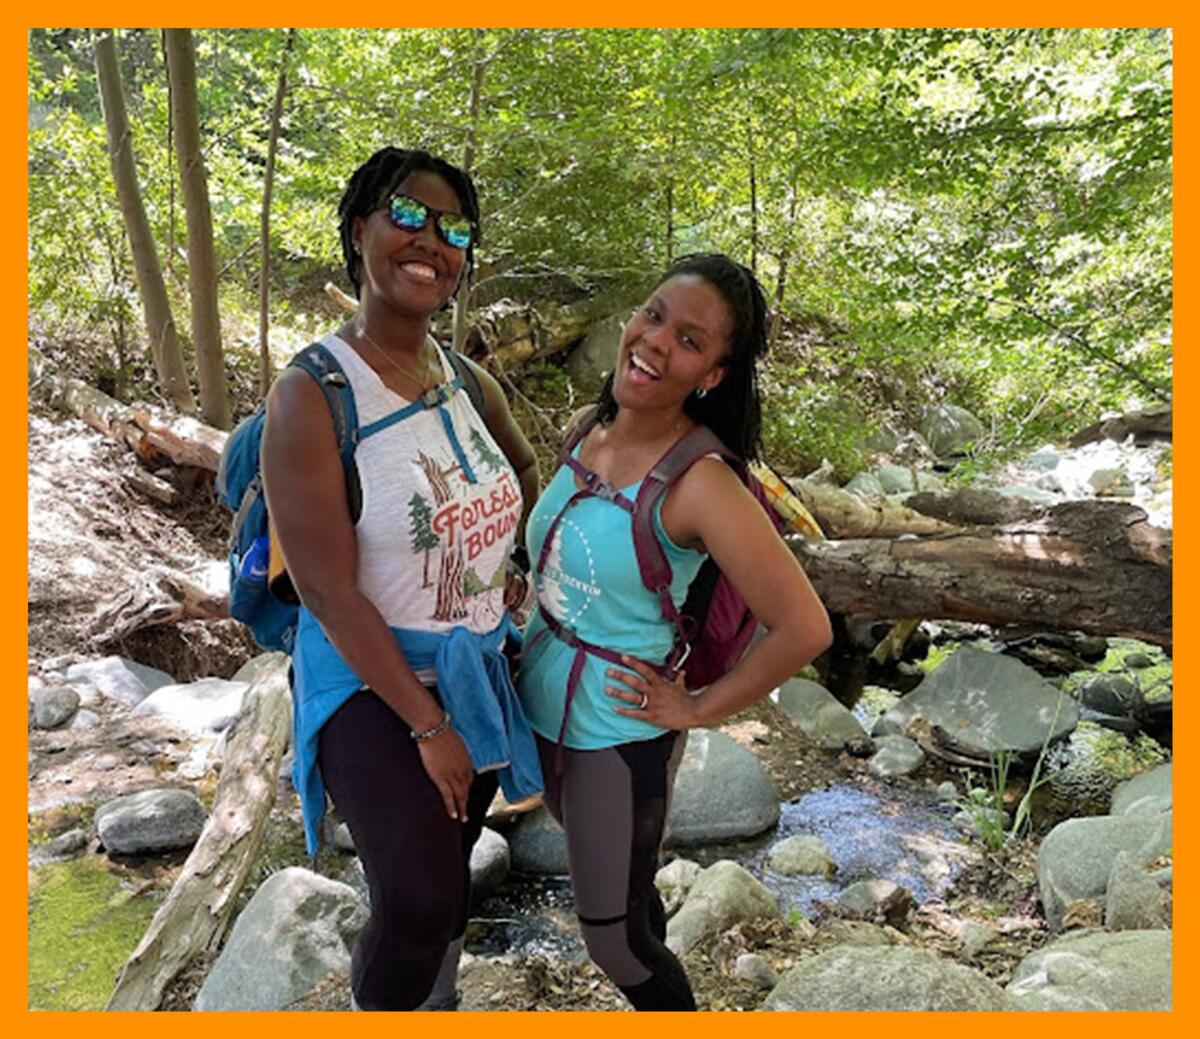 7 Reasons Why Black Women Shouldn't Try Outdoor Adventure Sports